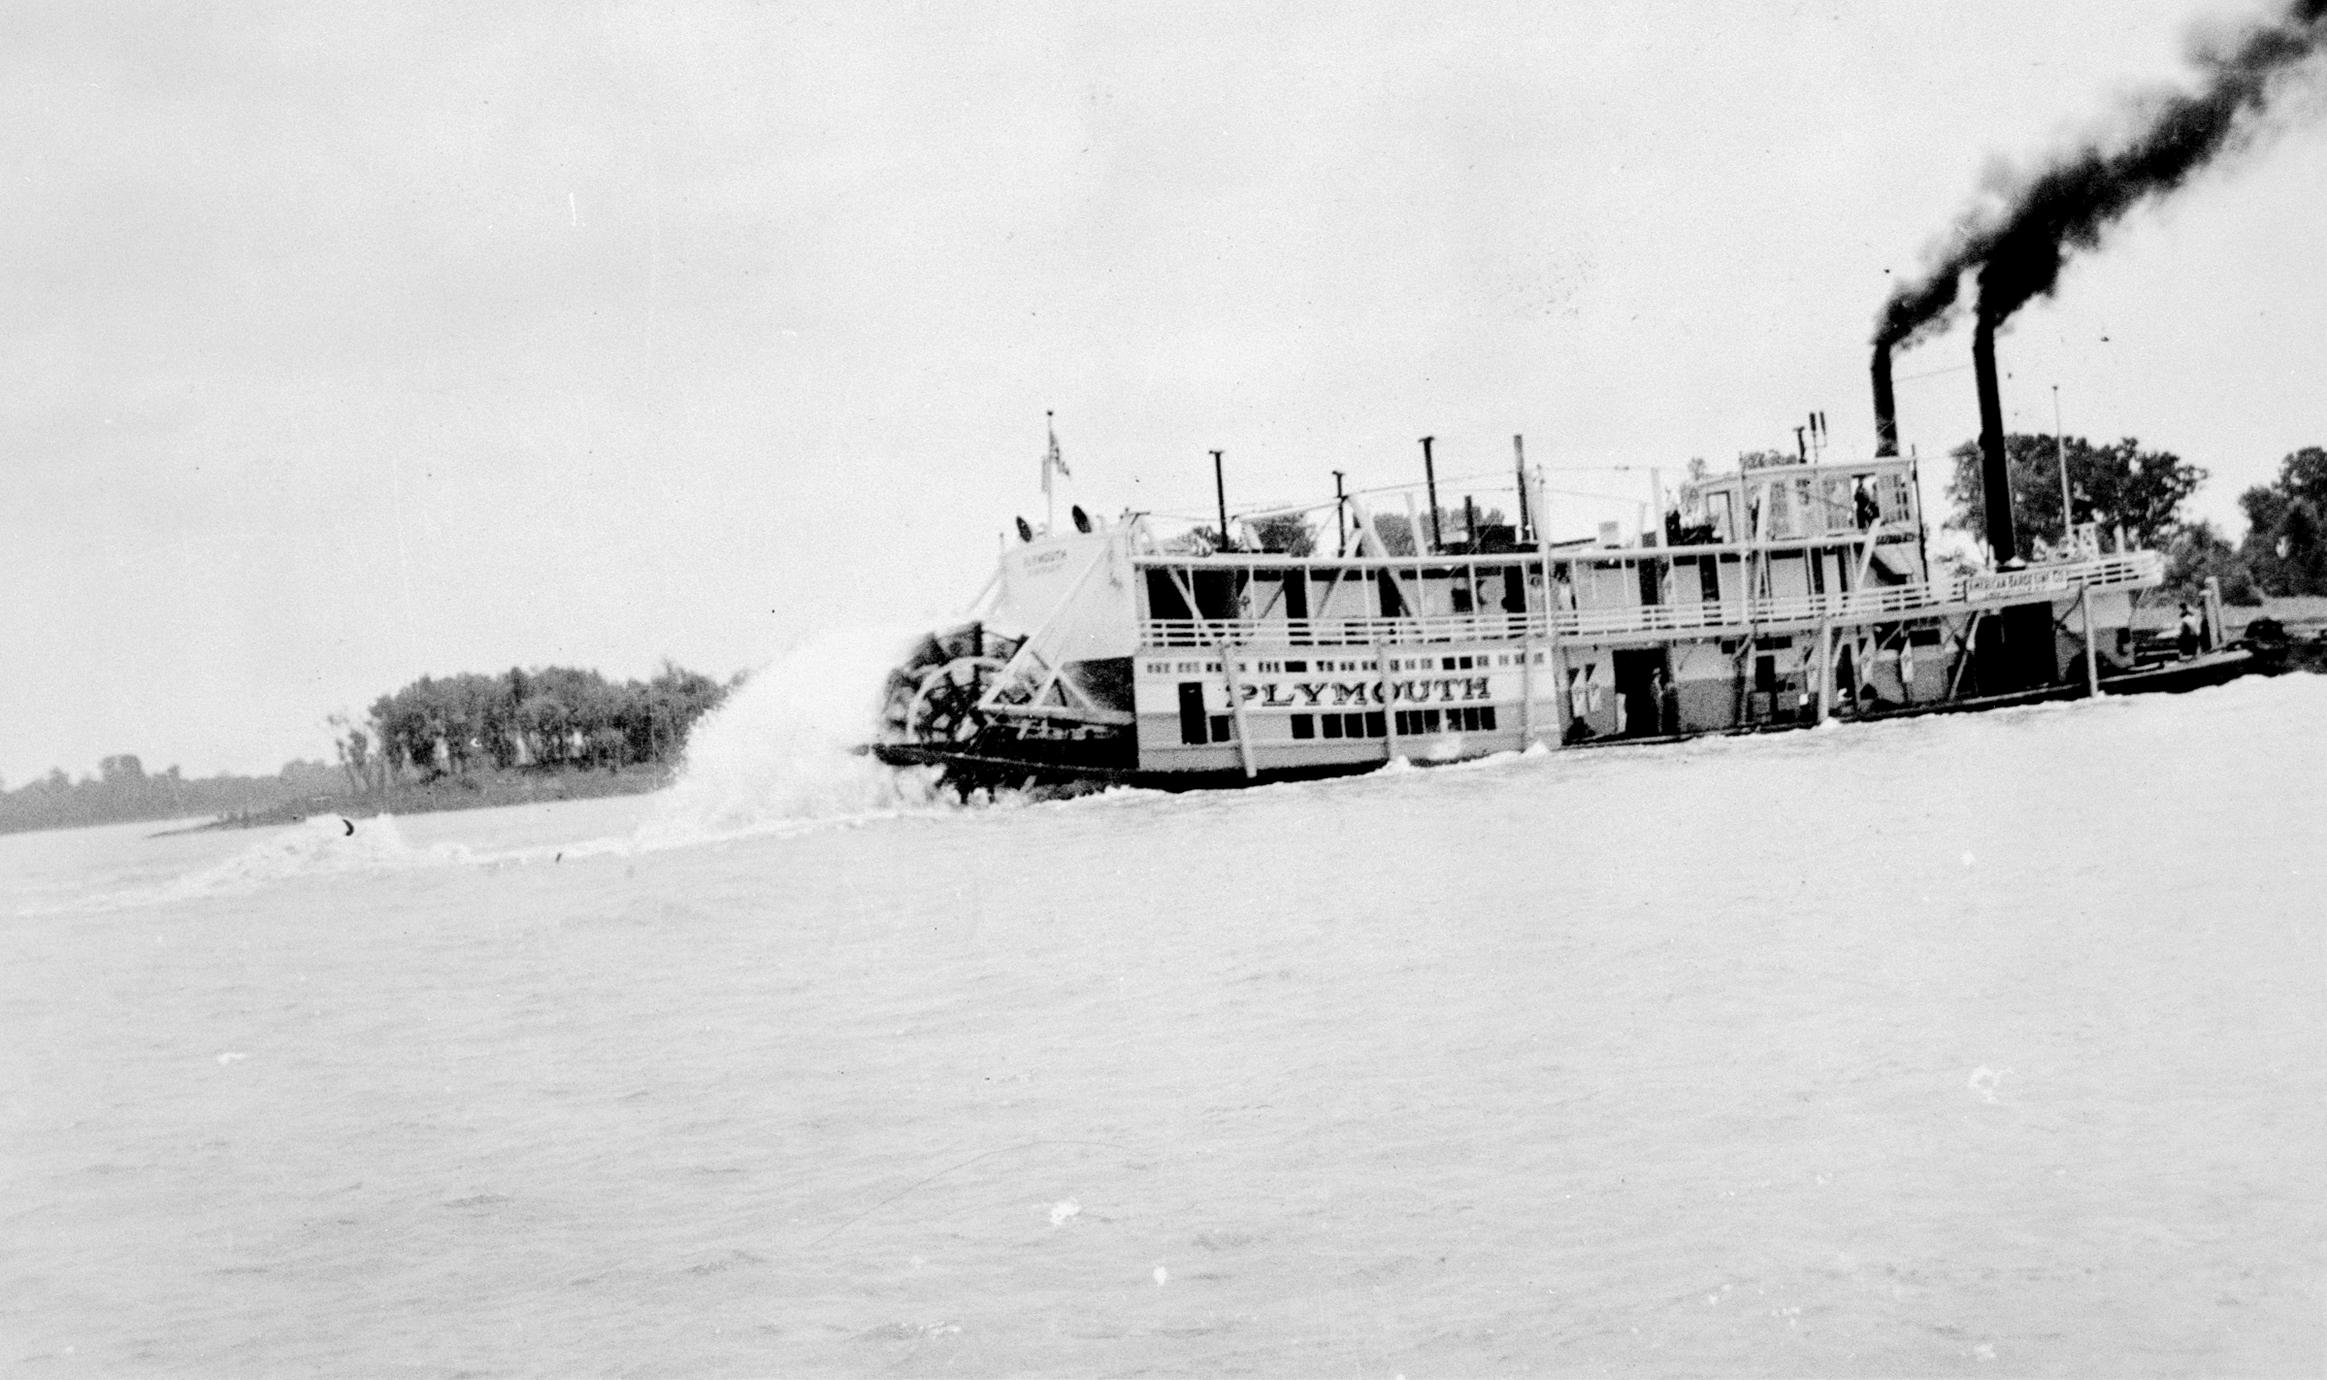 Plymouth (Towboat, 1911-1945)